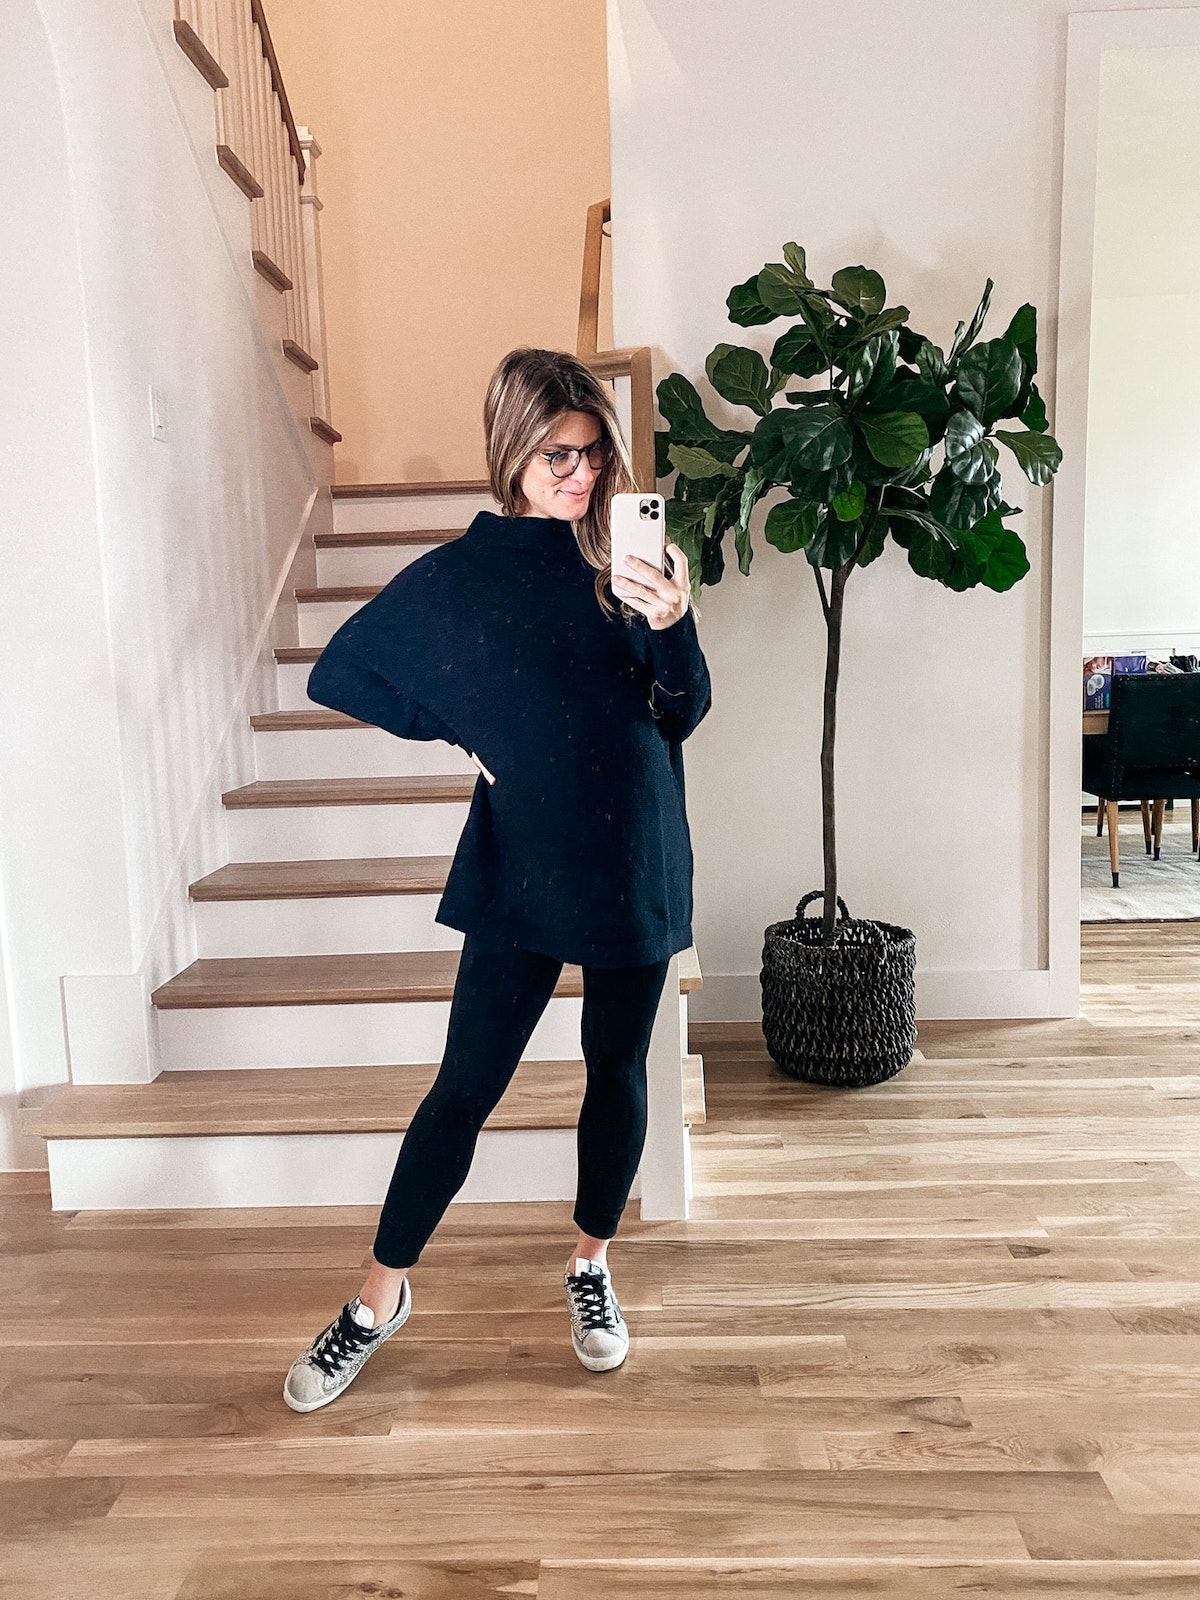 Brighton Butler wearing Amazon sweater with maternity leggings and Golden Goose sneakers